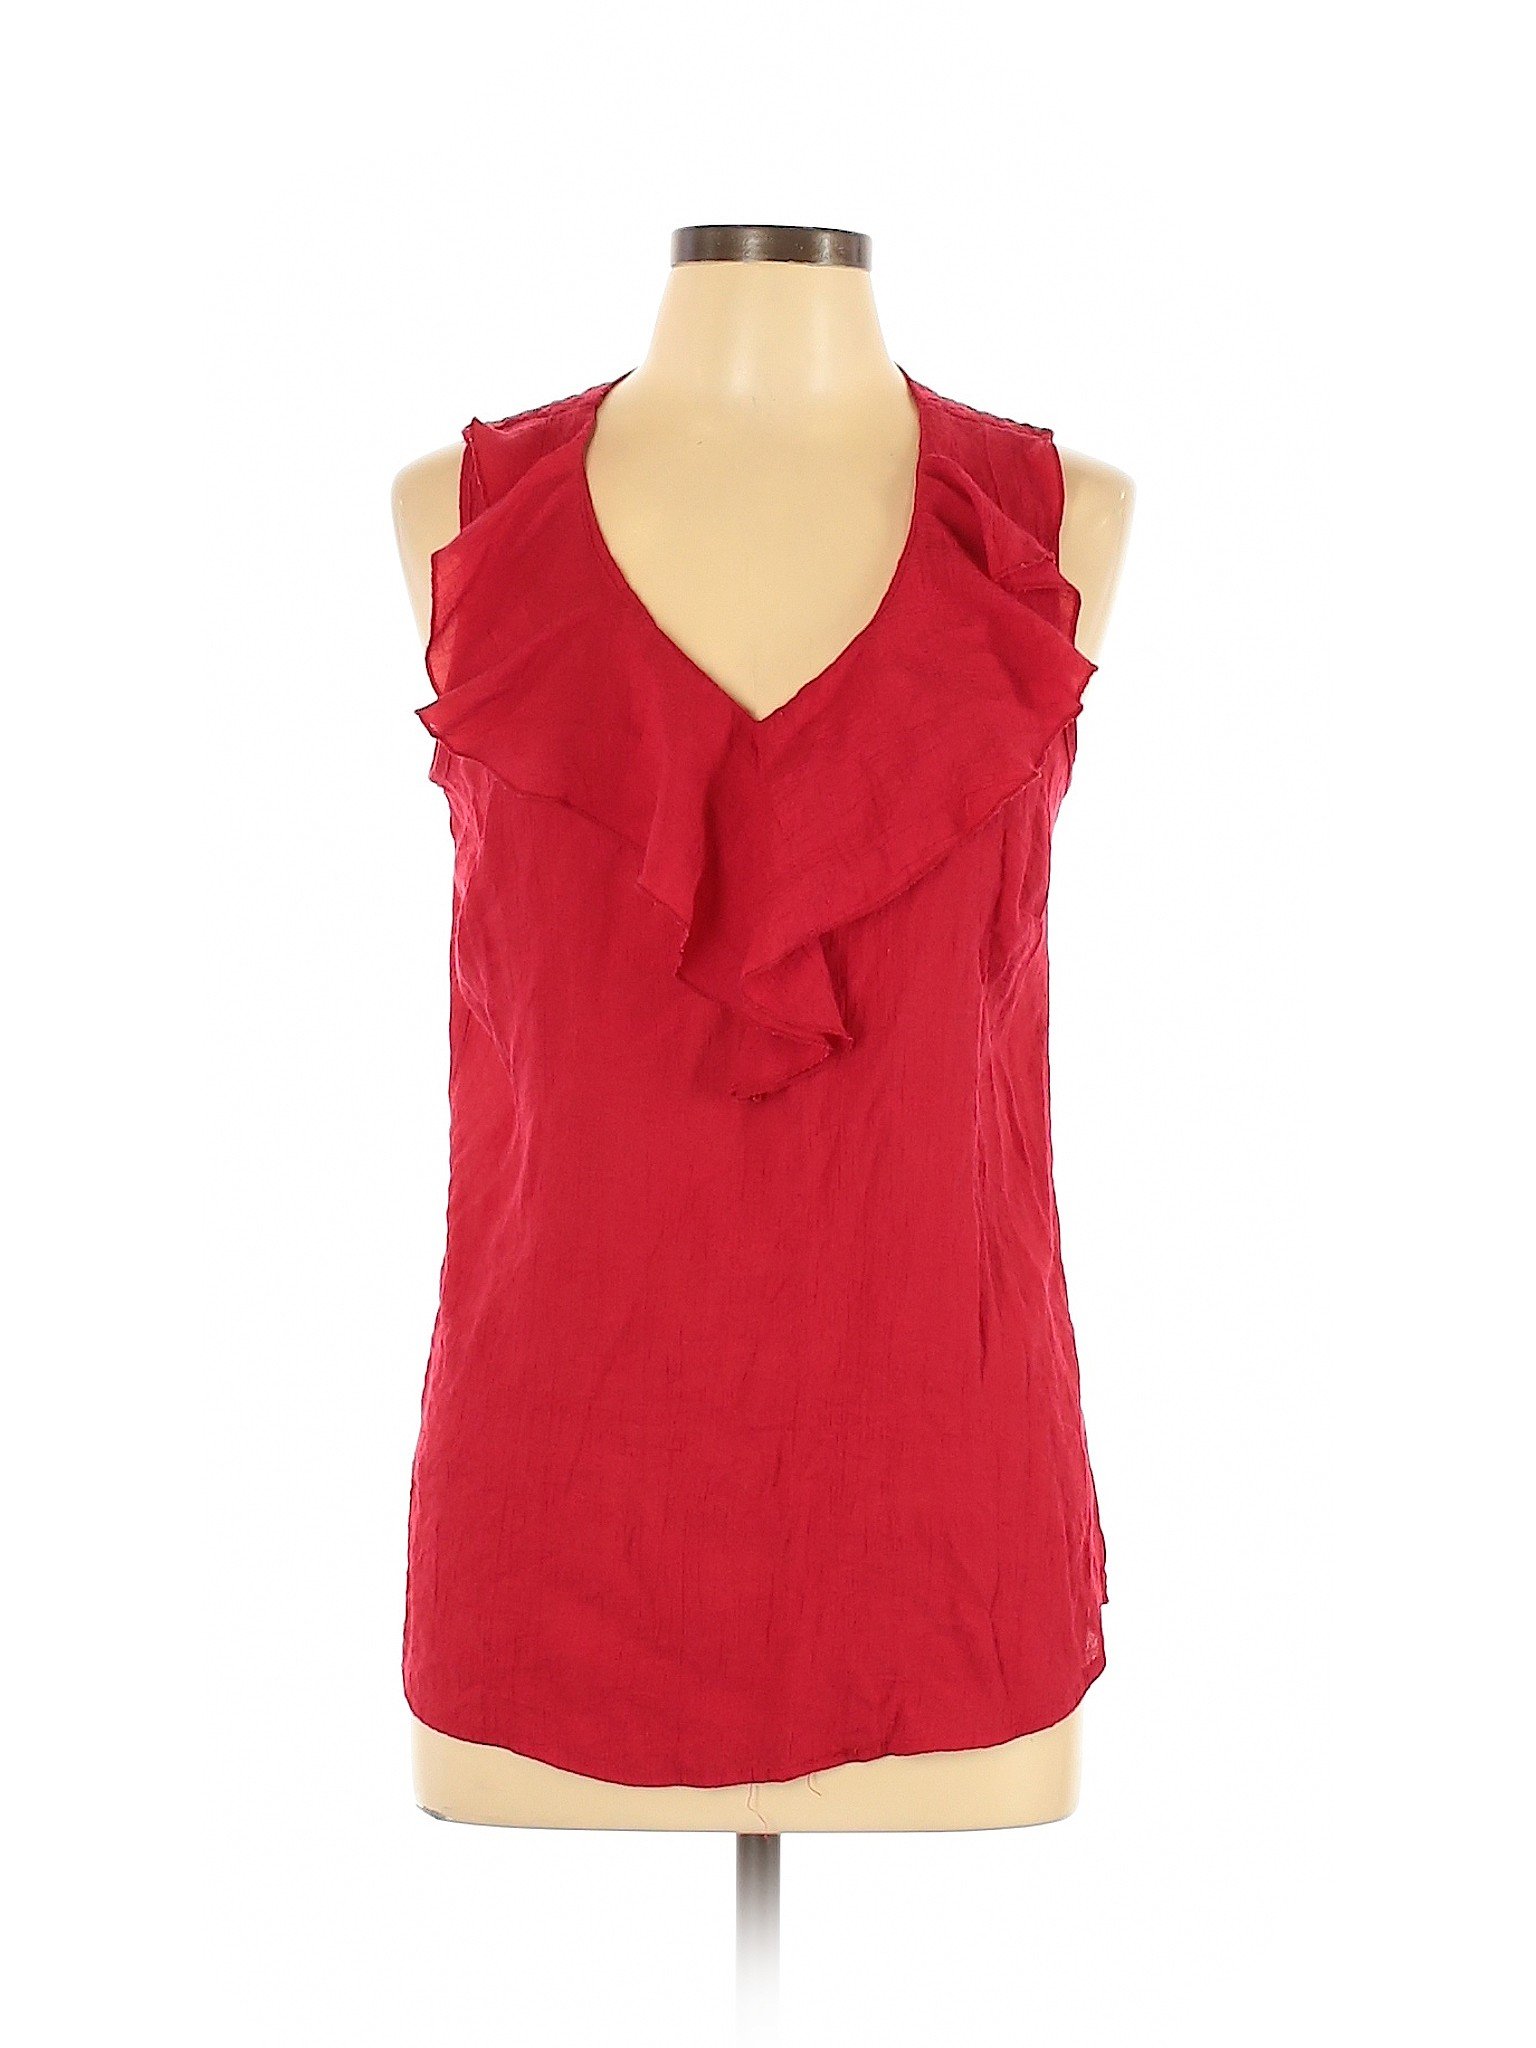 Cato Red Sleeveless Blouse Size L - 54% off | thredUP